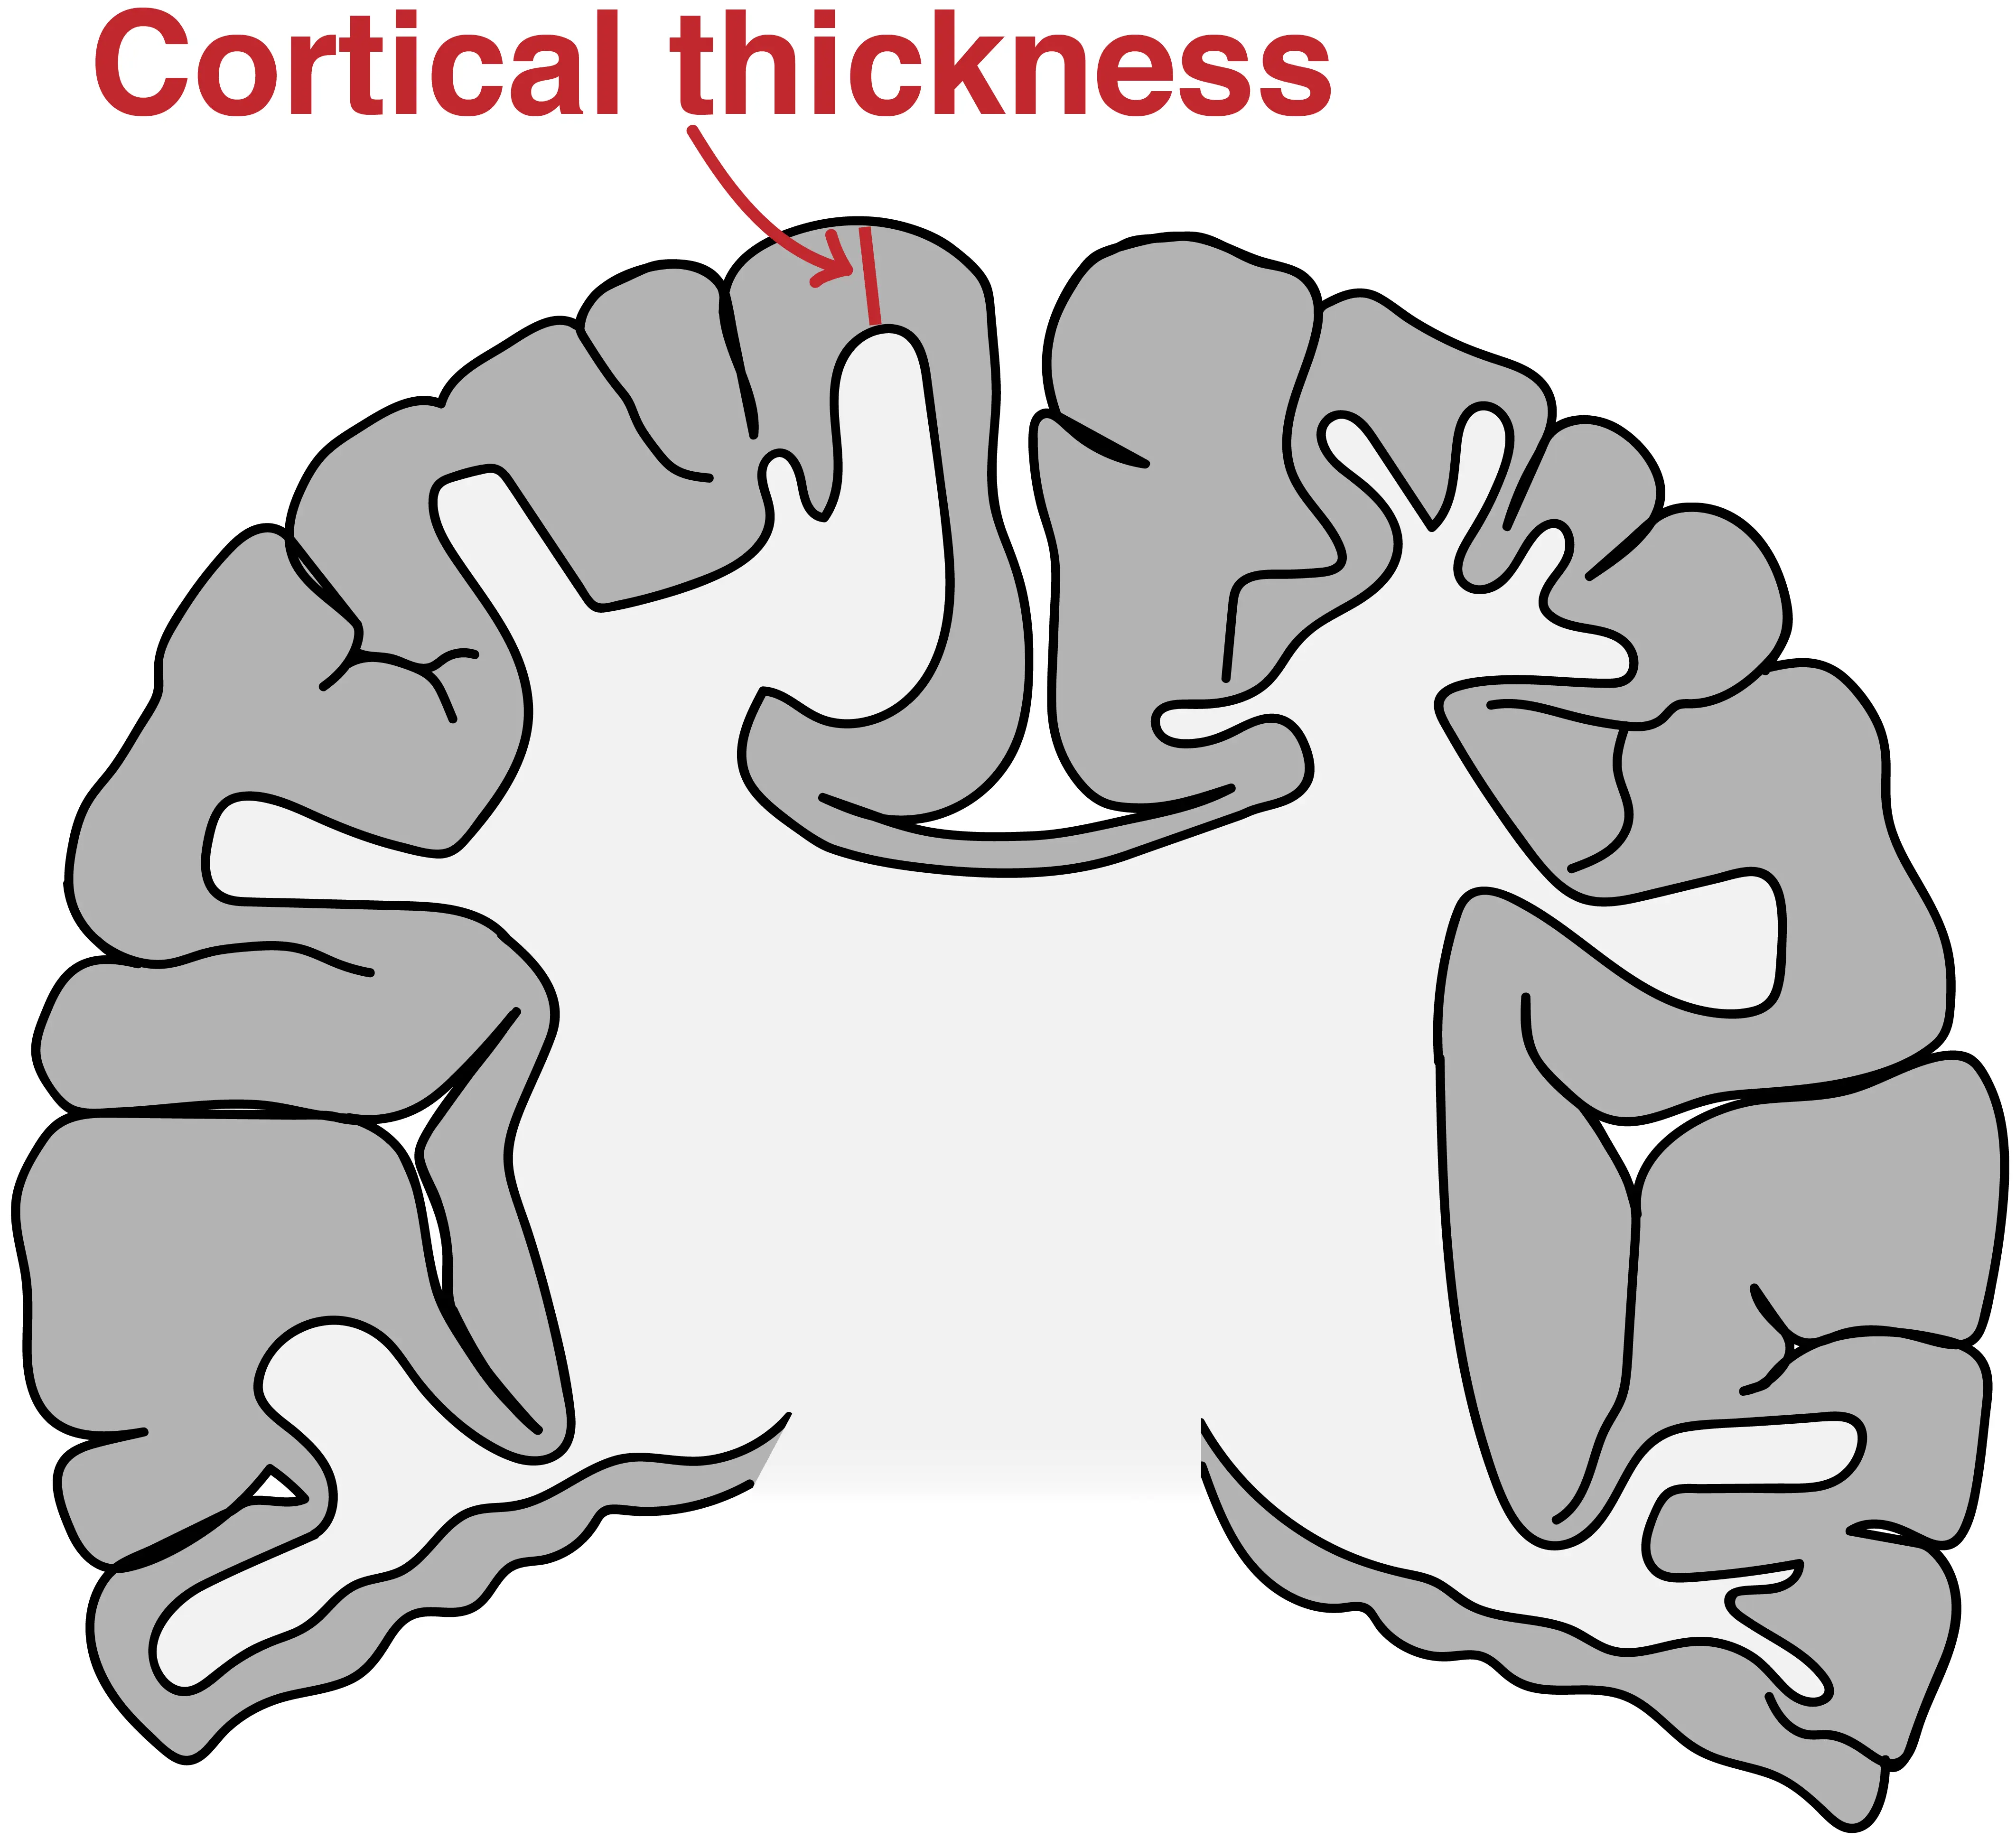 The thick cortex of human brain enables a dense packing of many nerve cells.